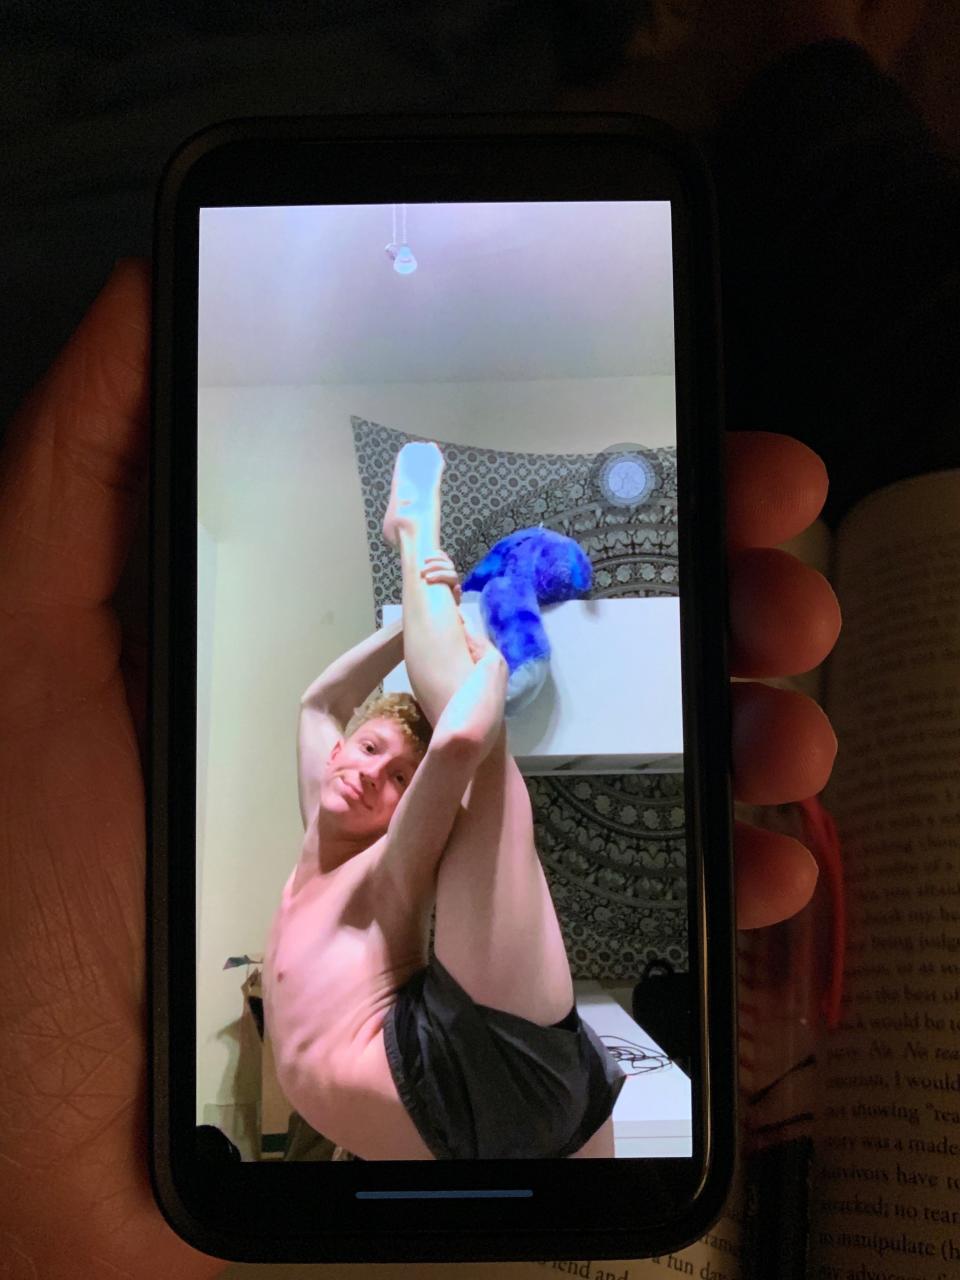 A photo of a Snapchat from Charlie's account, provided by the family, shows Charlie stretching his leg in a pose.